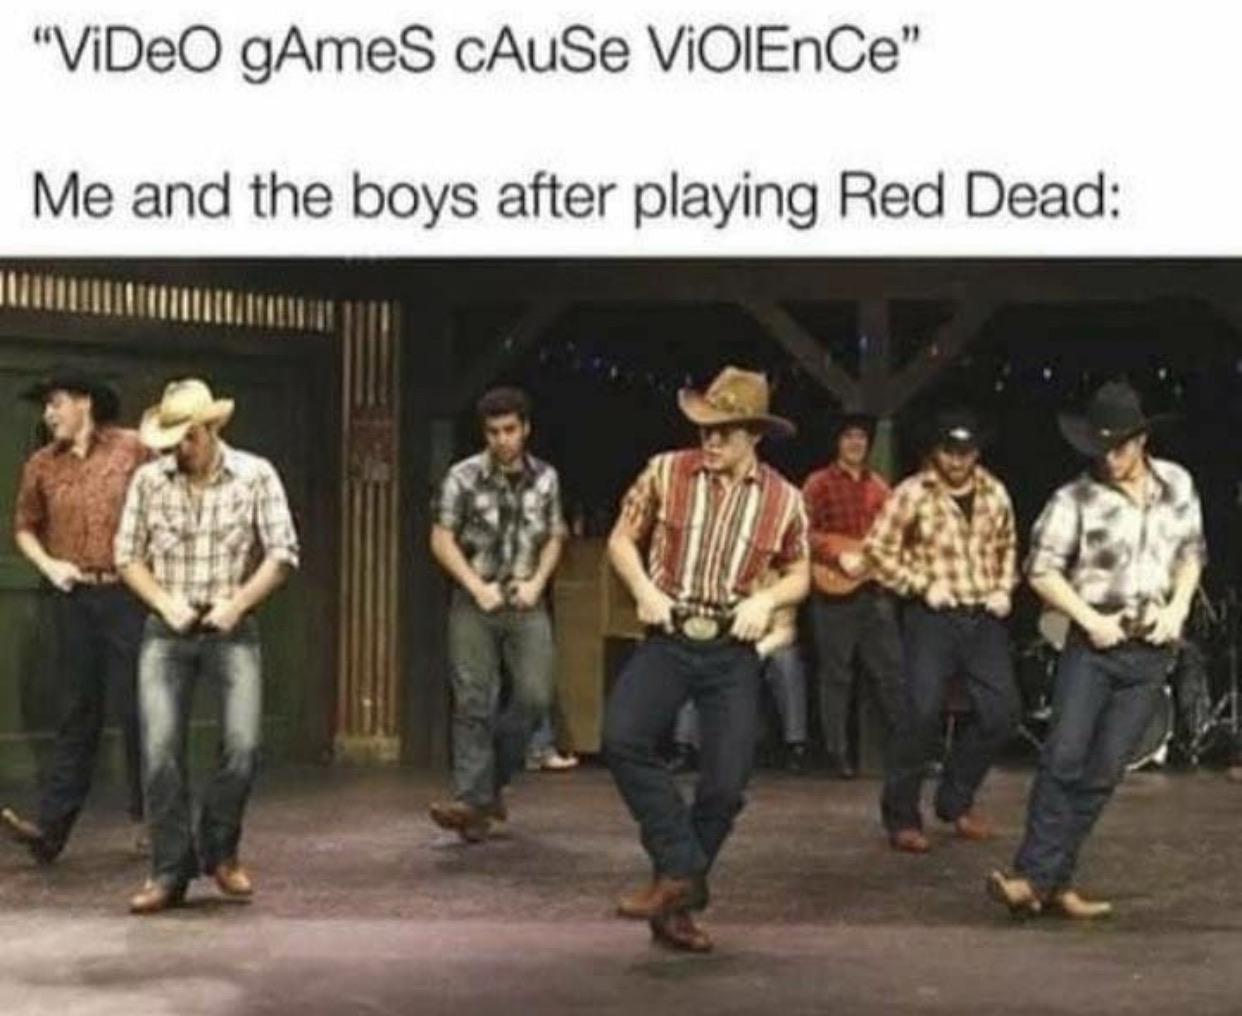 funny gaming memes -  me and the boys after playing red dead - "ViDeO gAmes cAuSe Violence" Me and the boys after playing Red Dead